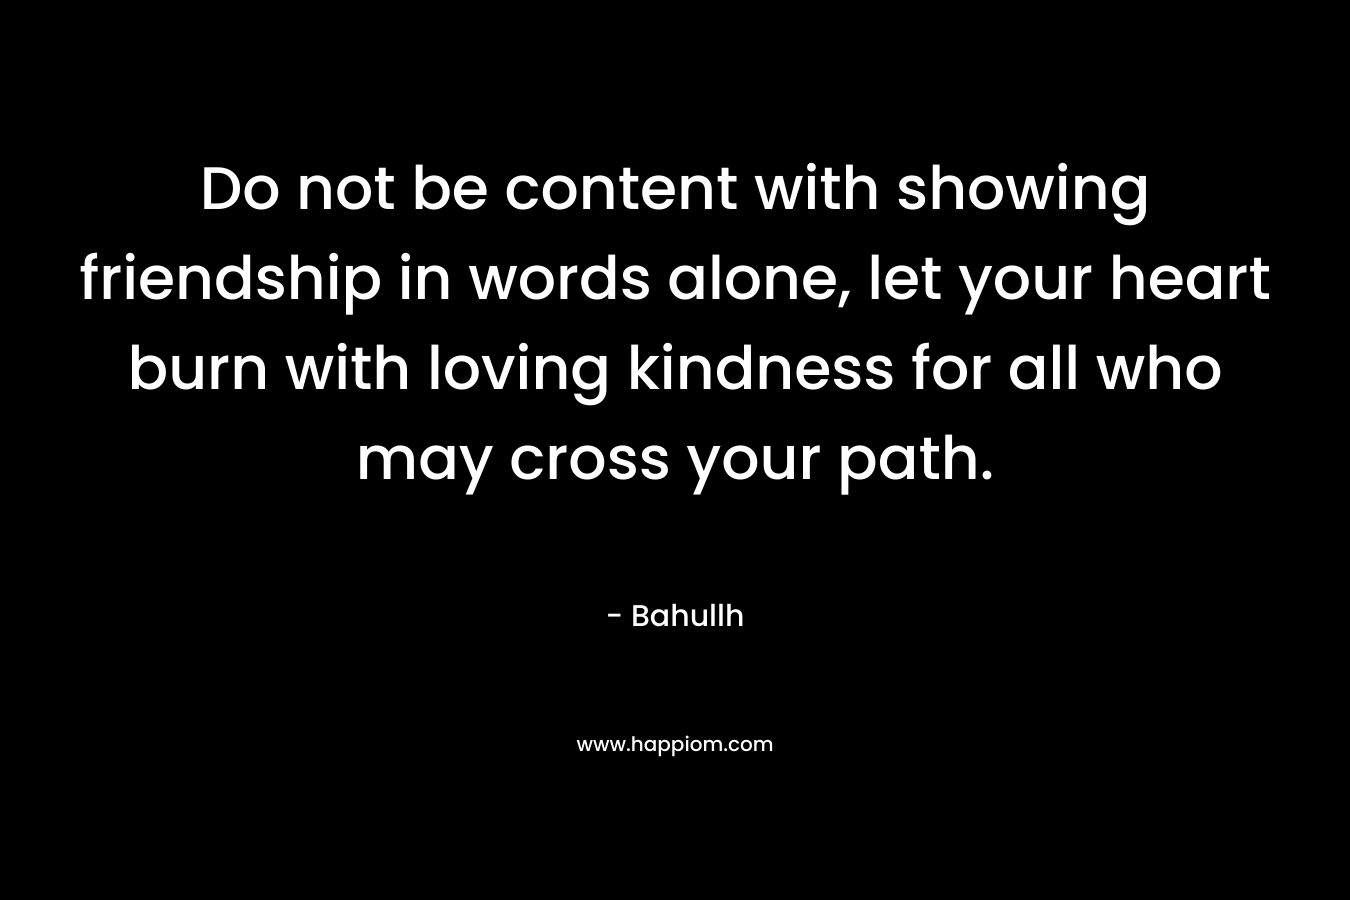 Do not be content with showing friendship in words alone, let your heart burn with loving kindness for all who may cross your path. – Bahullh